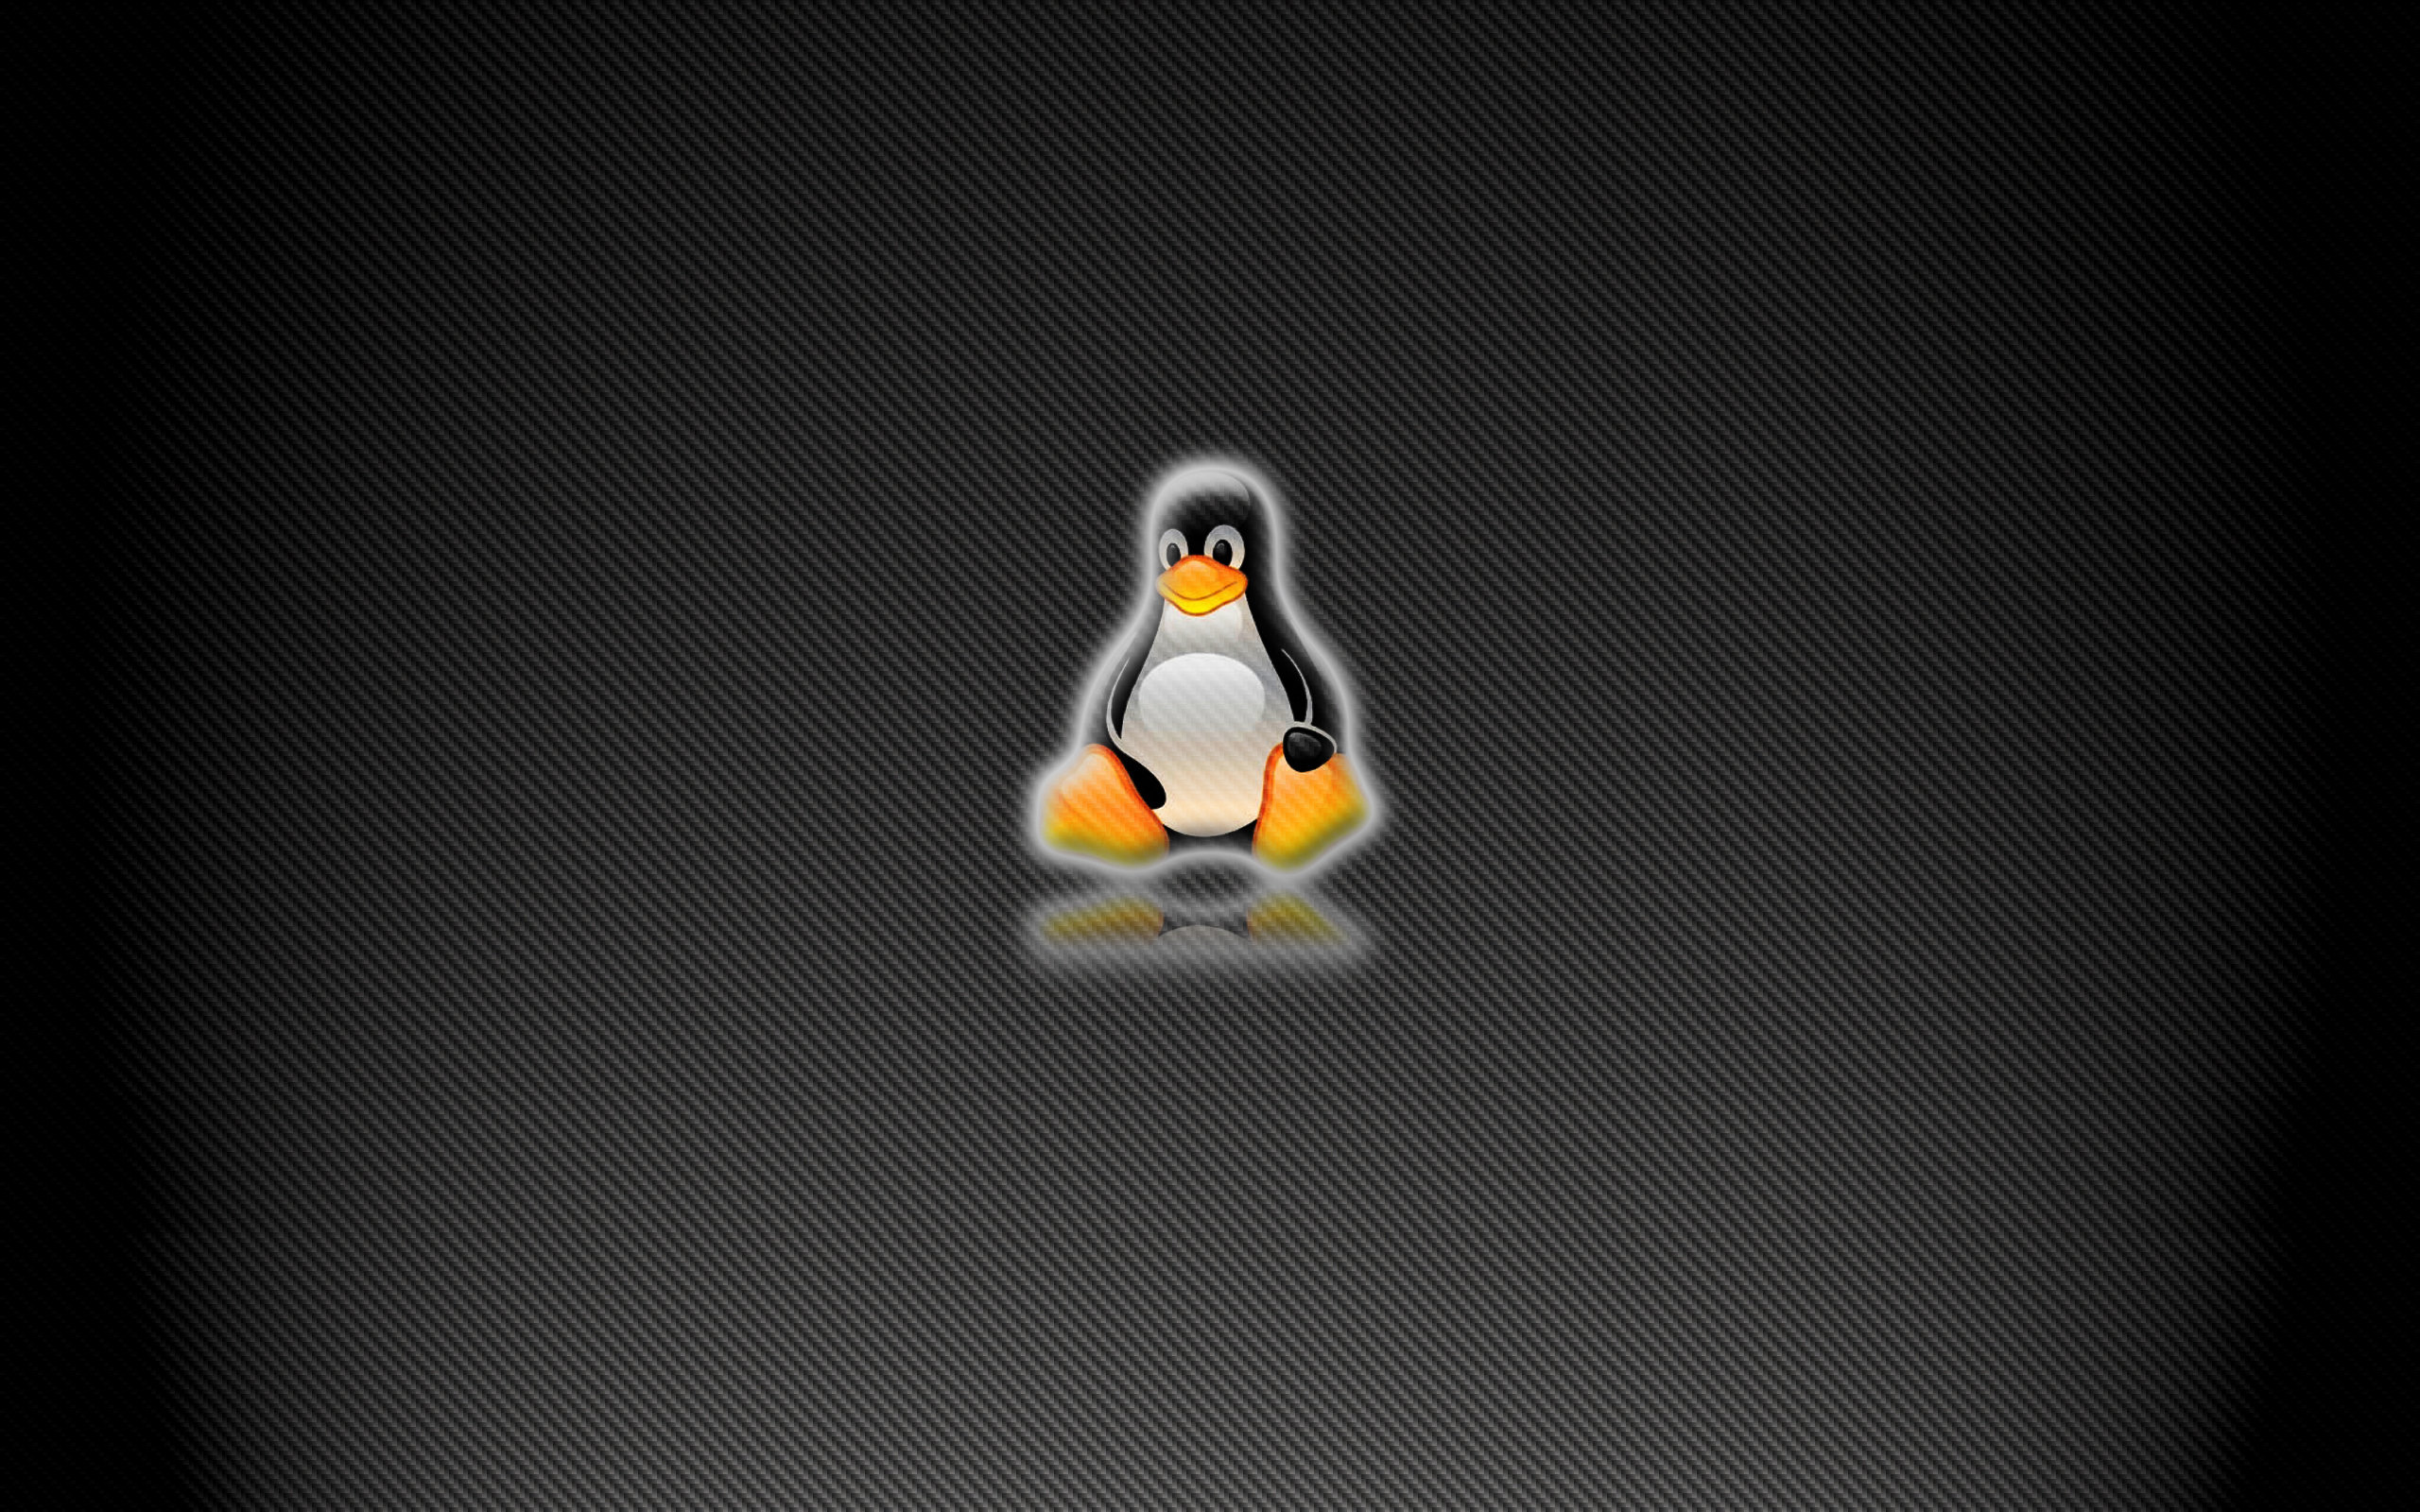 Linux Wallpaper High Quality